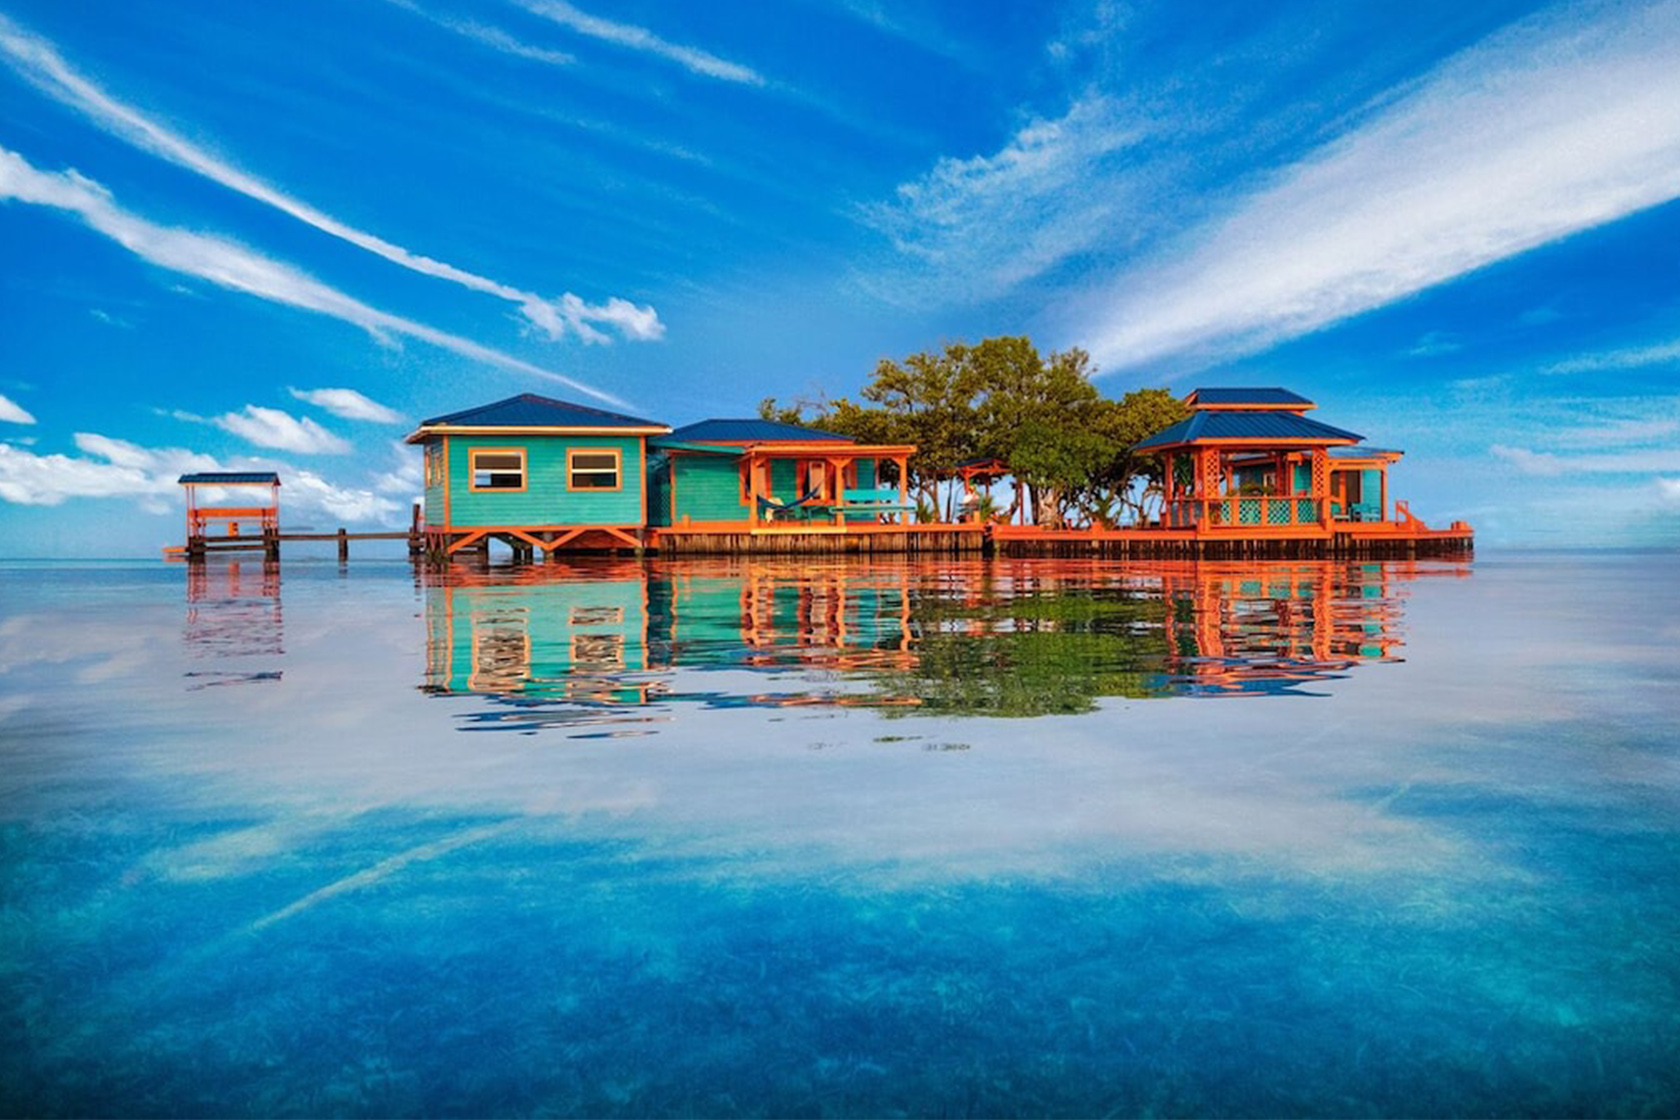 You can rent this private island in Belize for under $900 a night